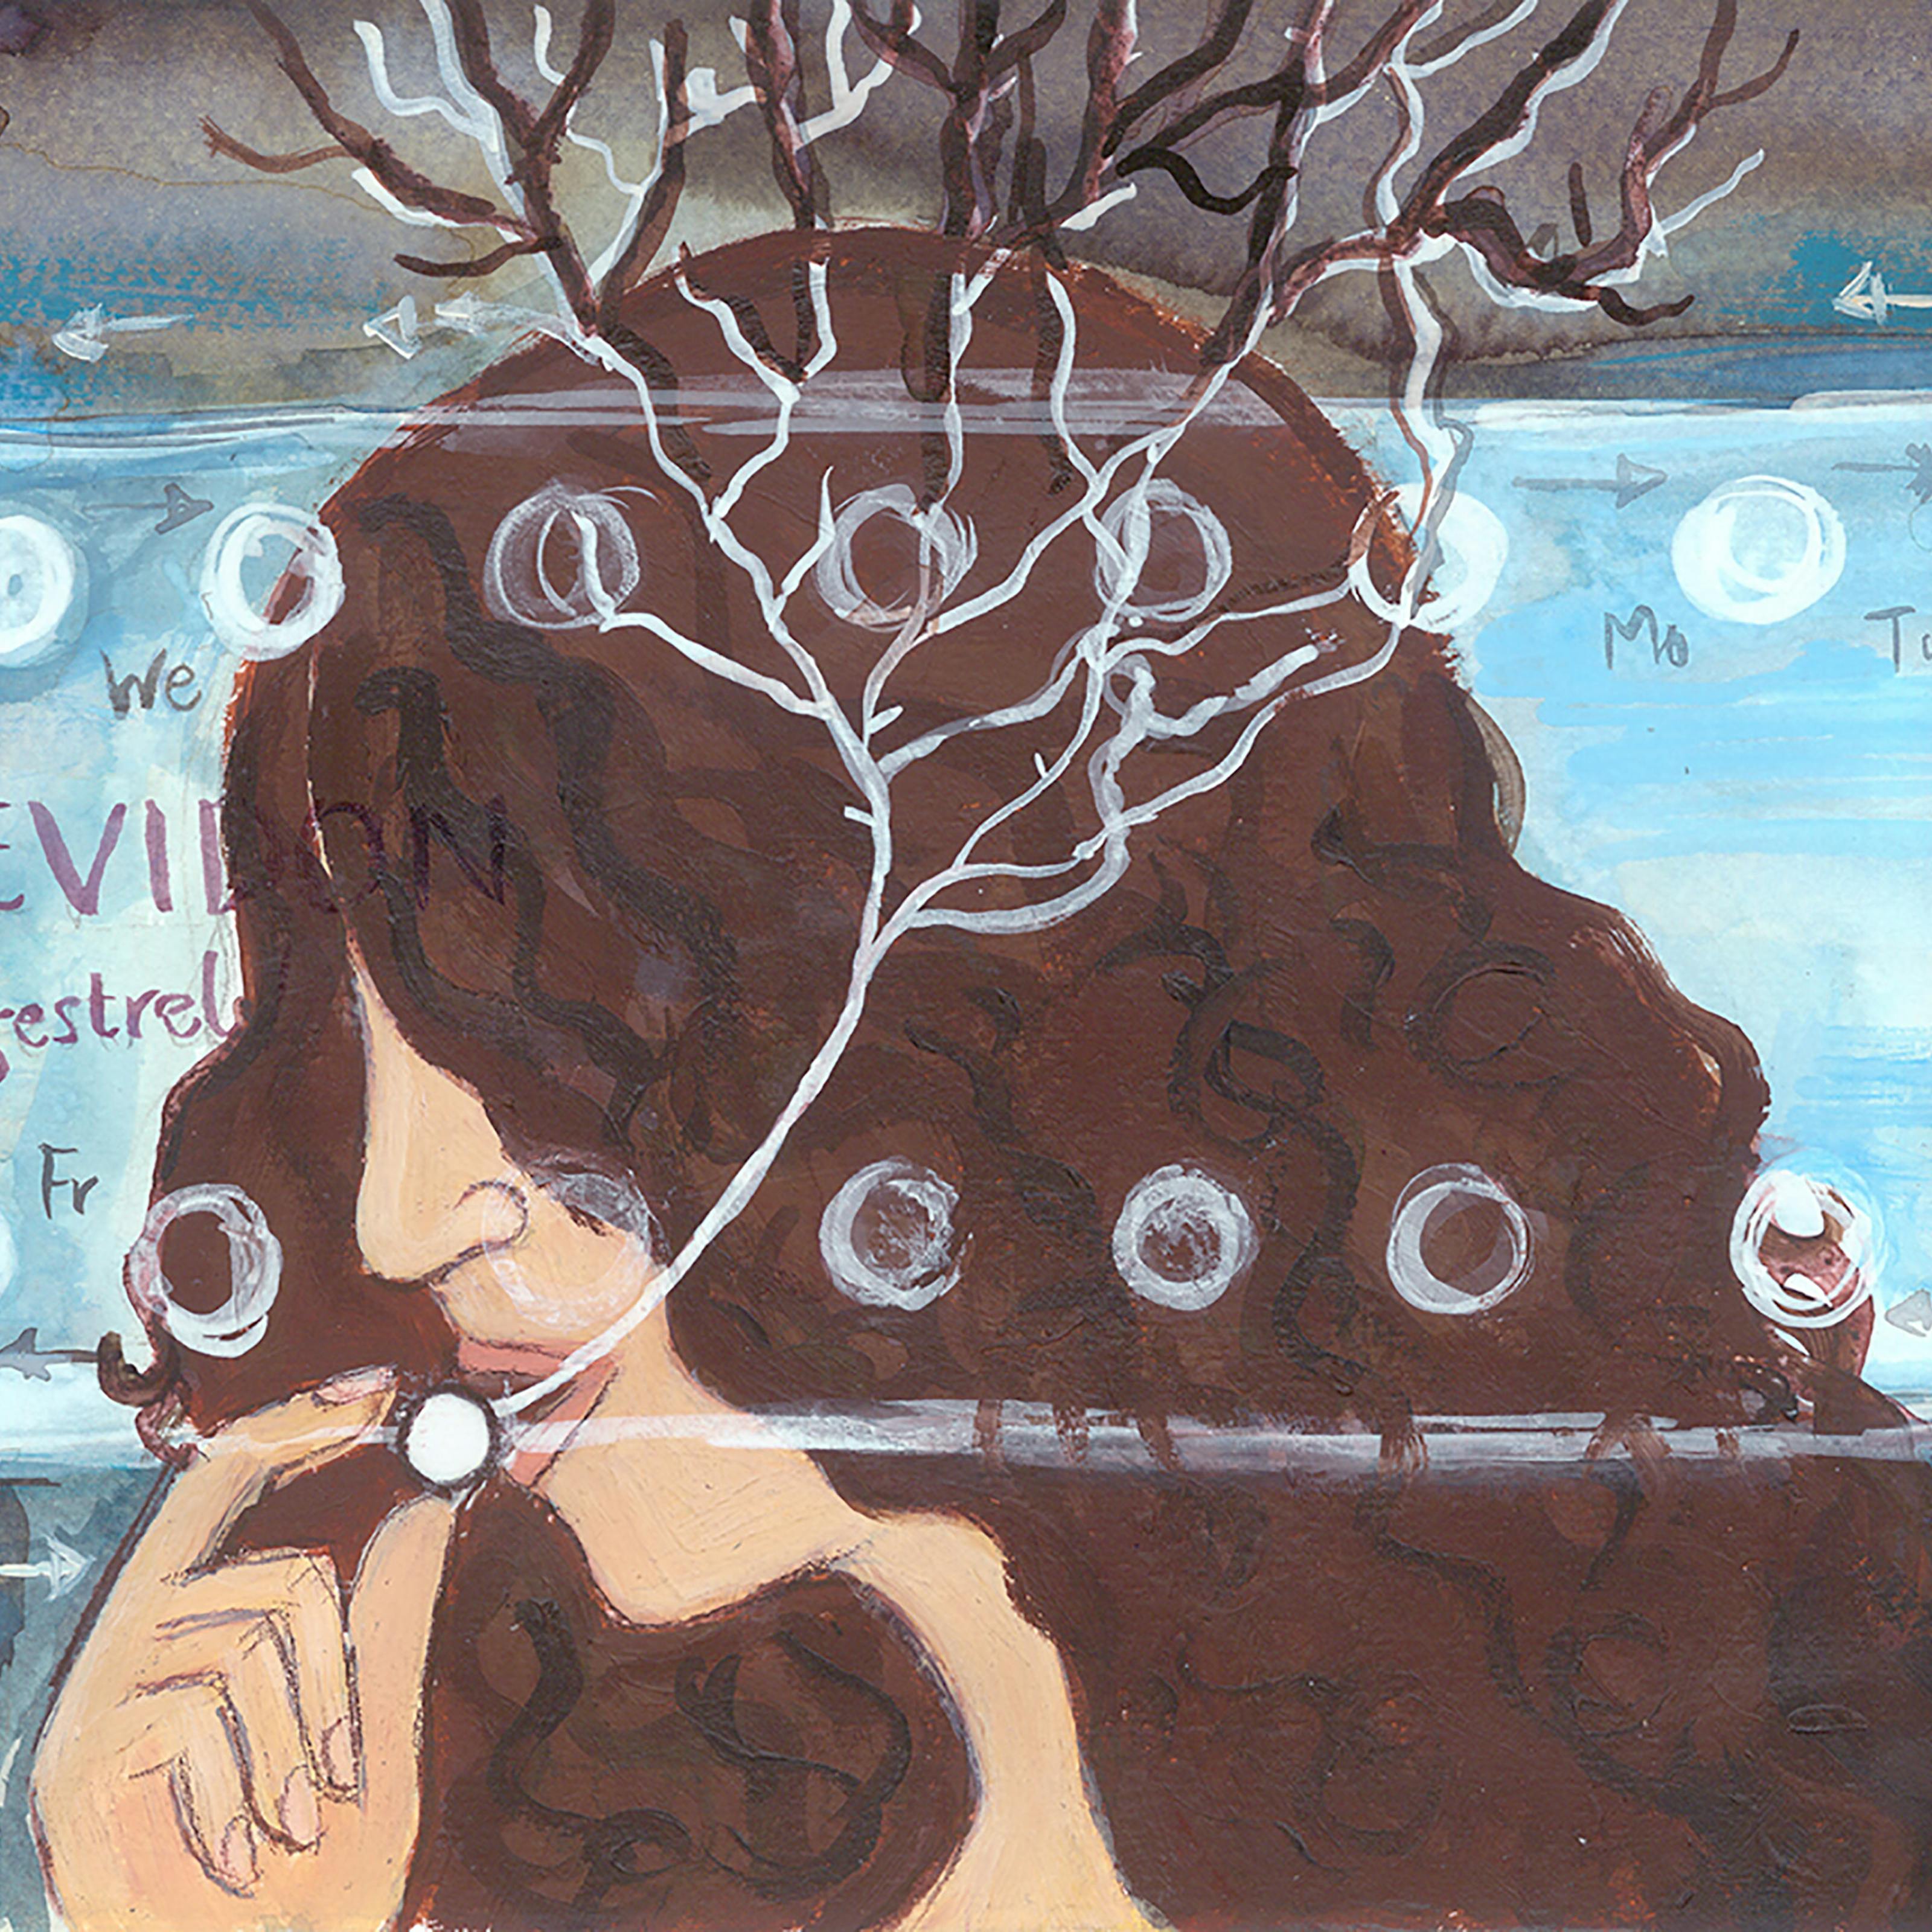 Photograph of a watercolour painting. In the middle is a the side profile of a girl with curly brown hair. Her hair is covering her eyes. She is holding a white circular pill up to her lips which are slightly parted. A white branching line is coming out of the pill and extends through the girl's mouth and up towards the top of her head. White and brown tree-like branches are coming out from the top of the girl's head. In the background there is a large contraceptive pill packet, each pill capsule labelled with a different day of the week. In the middle of the packet there is text that reads 'RIGEVIDON' and smaller text underneath that reads 'levonogestrel'.